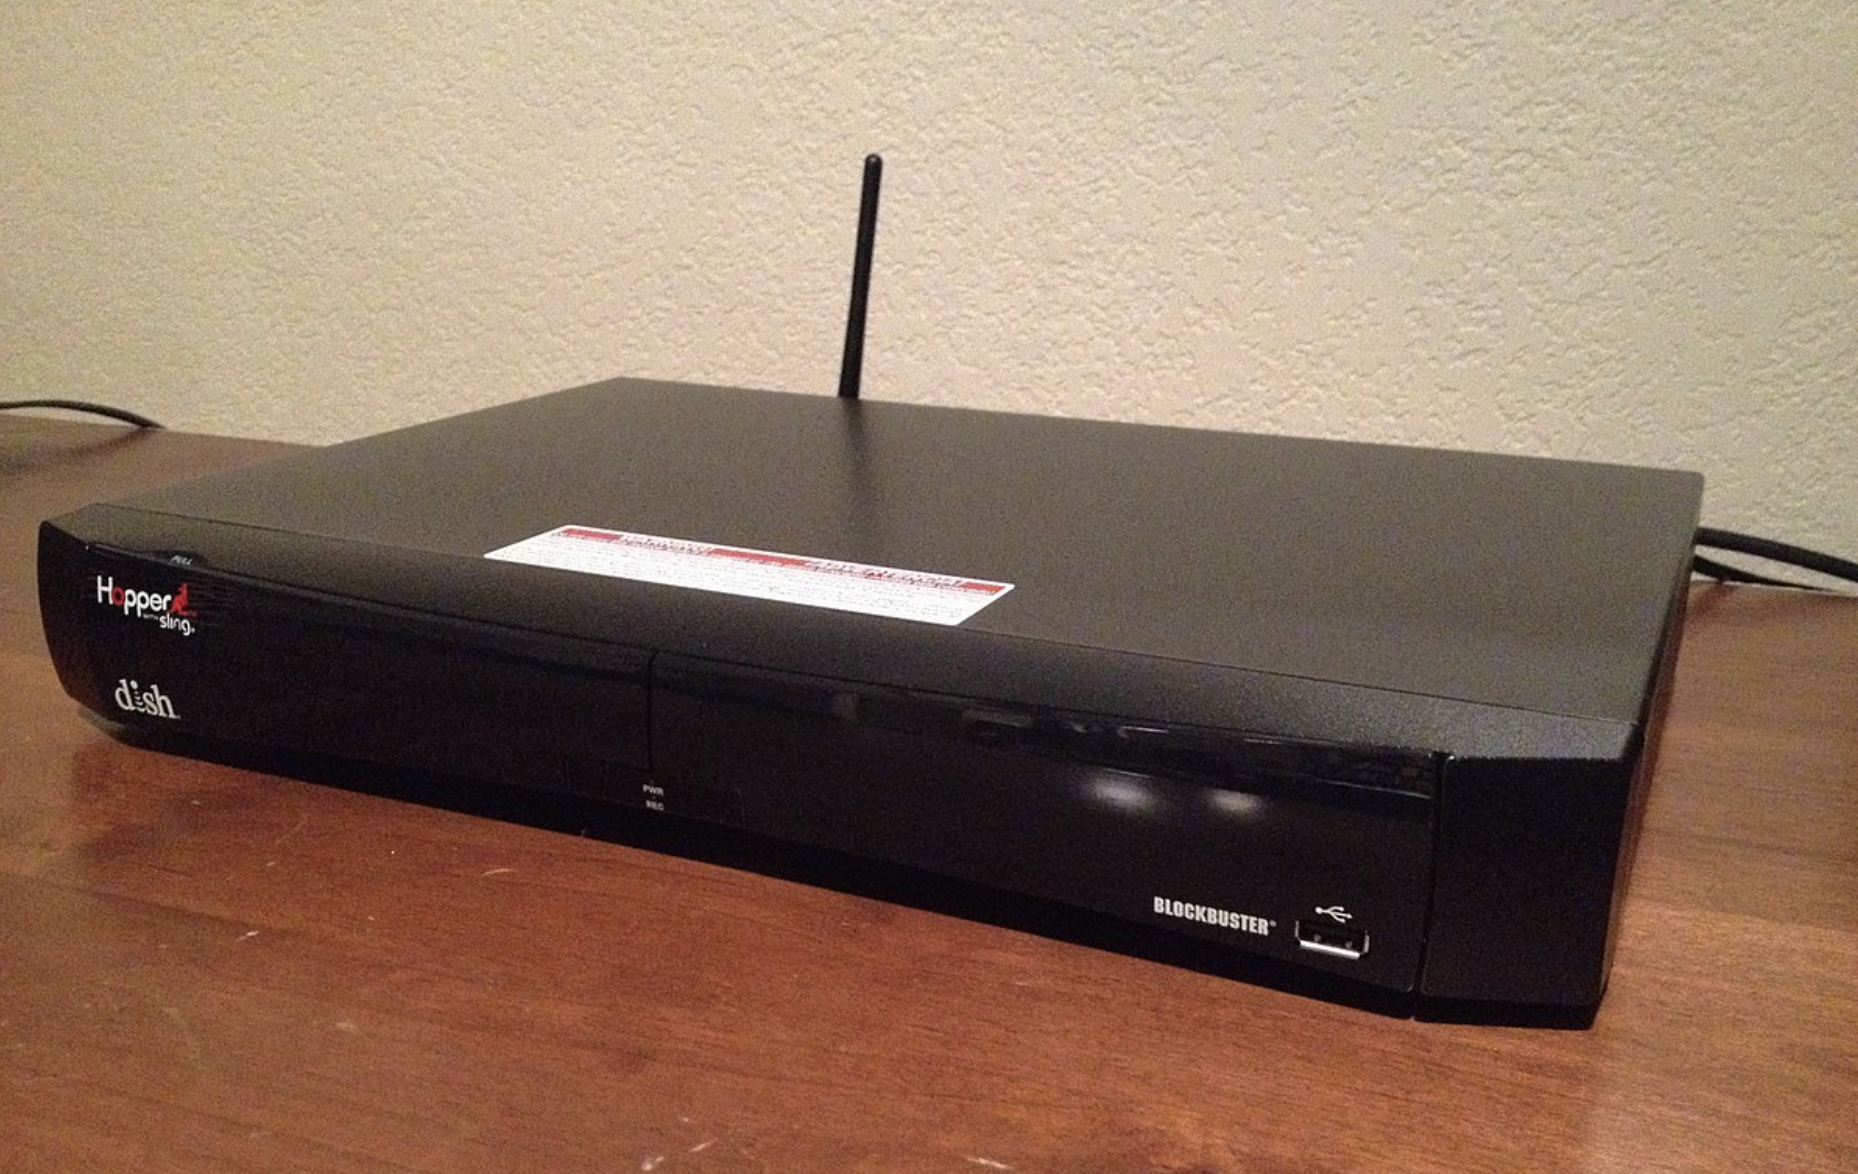 The Most Common Featureson DVRs